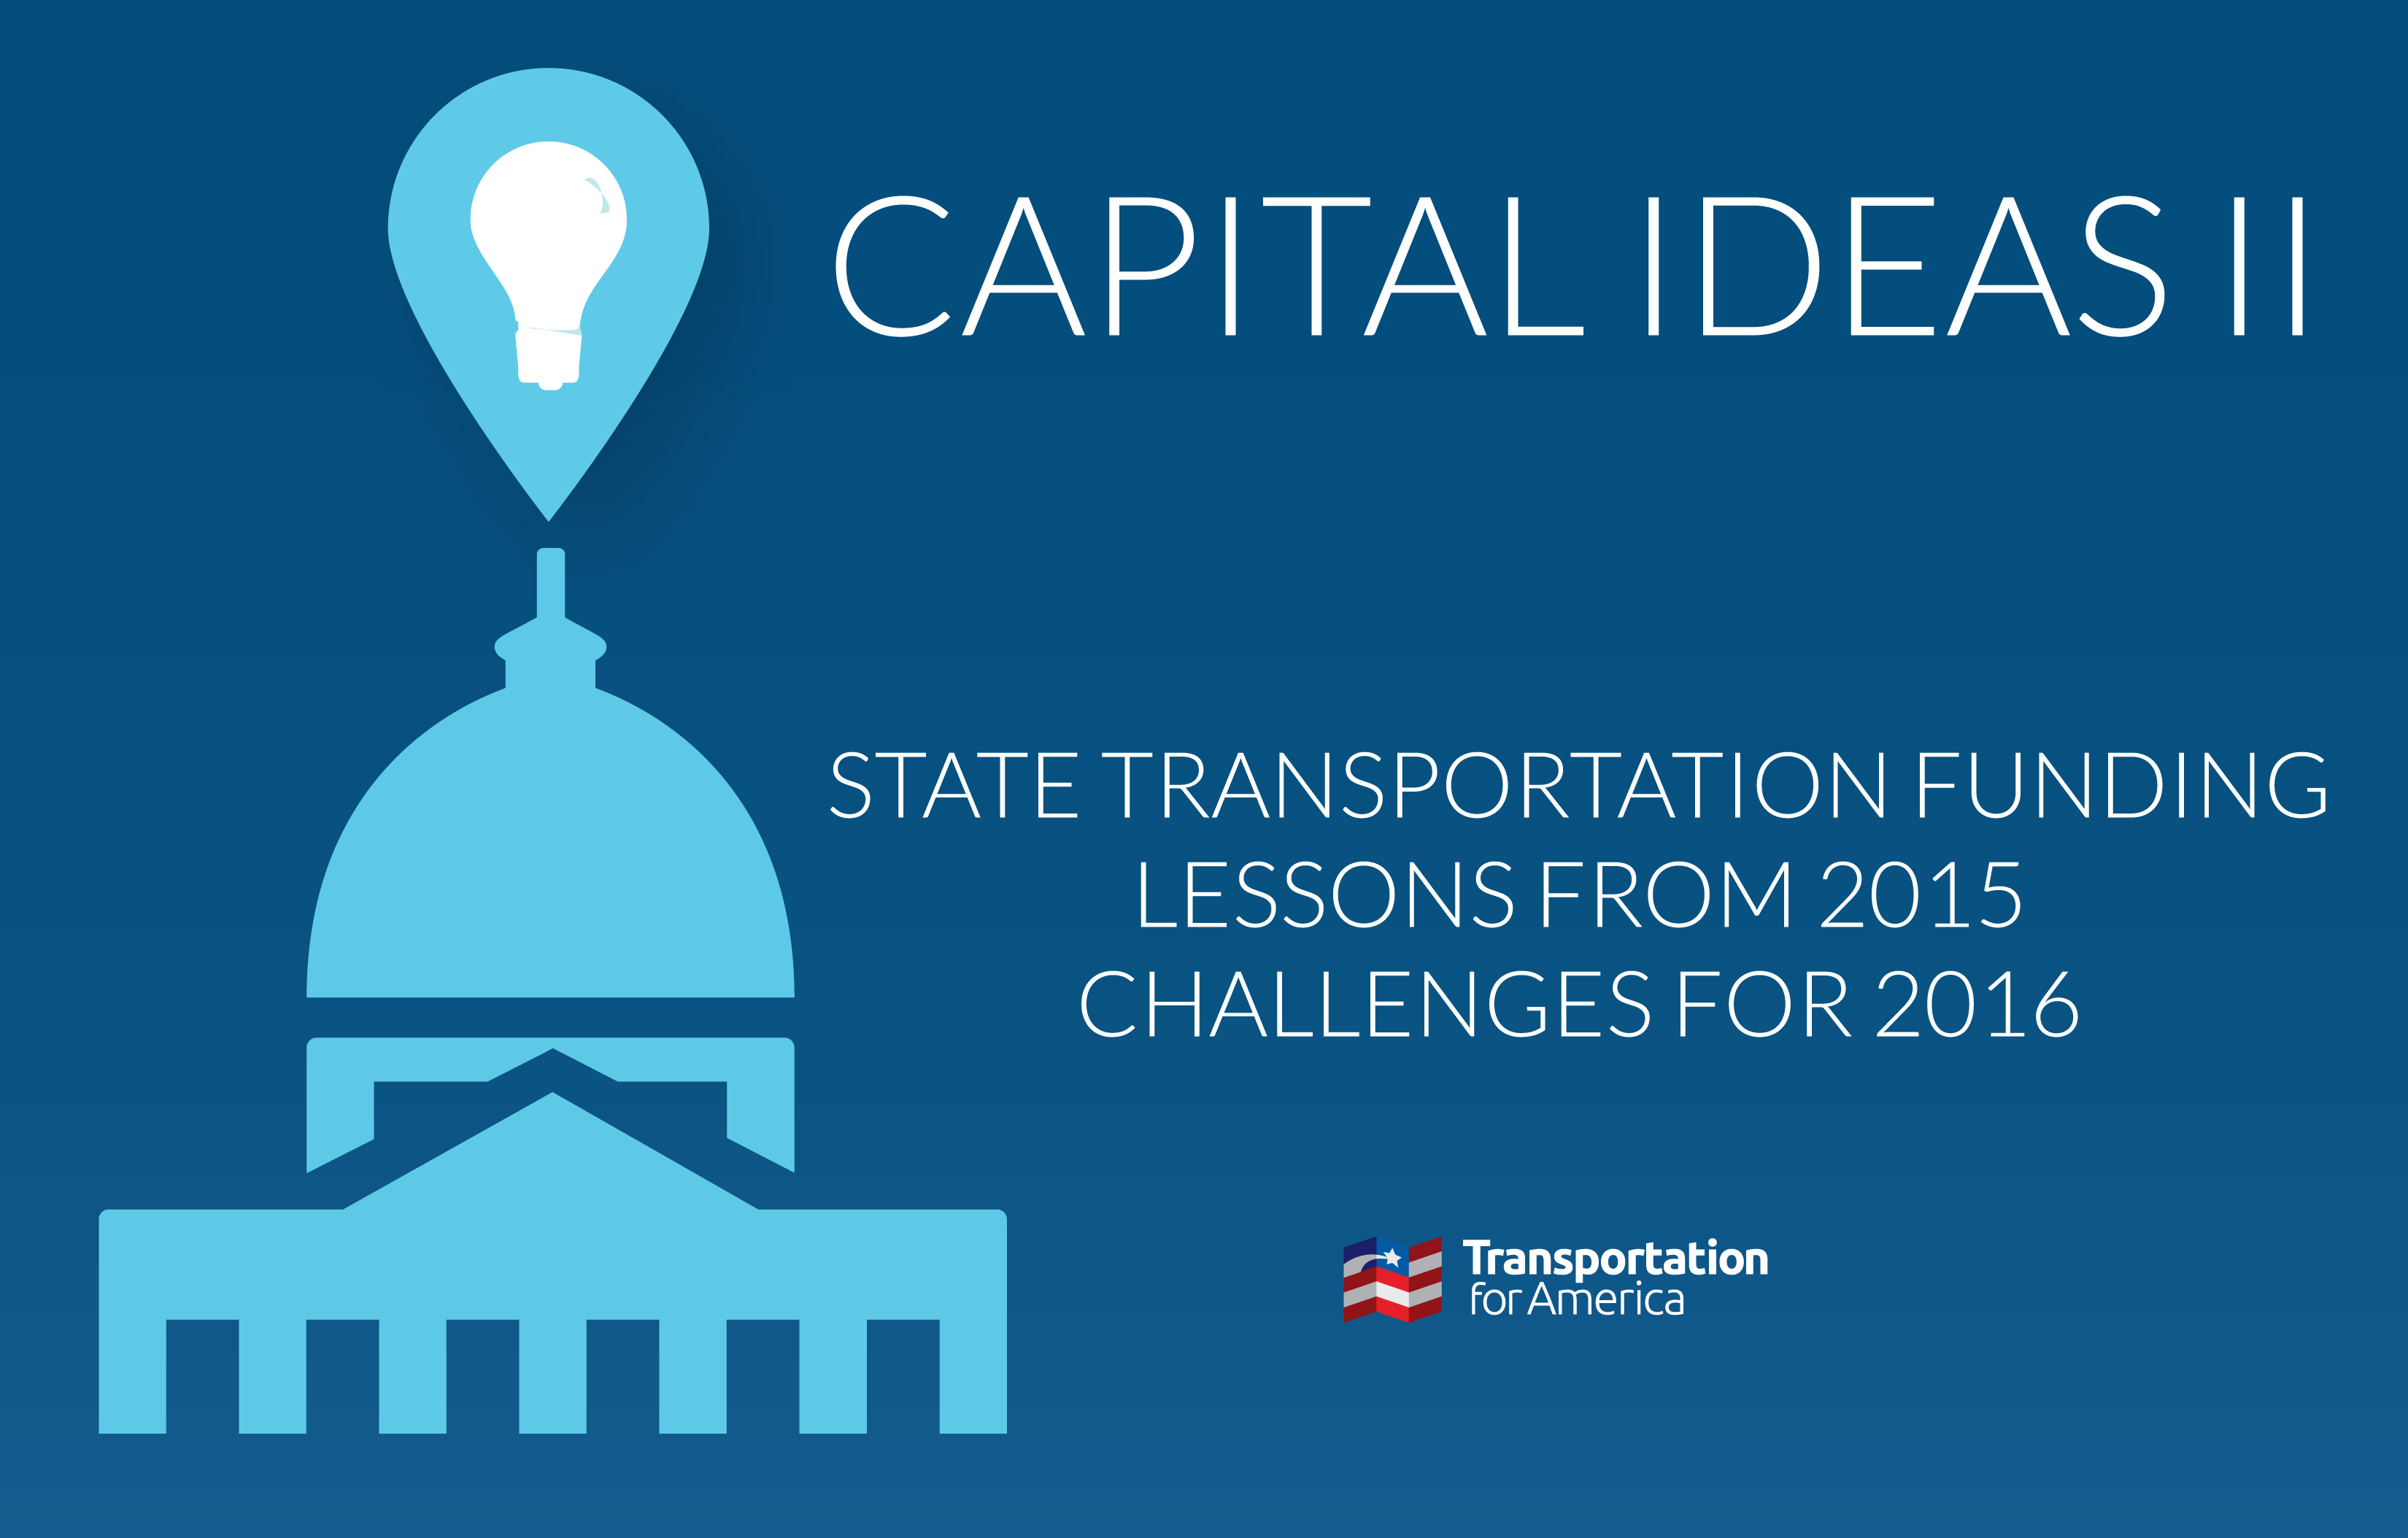 State Transportation Funding in 2015